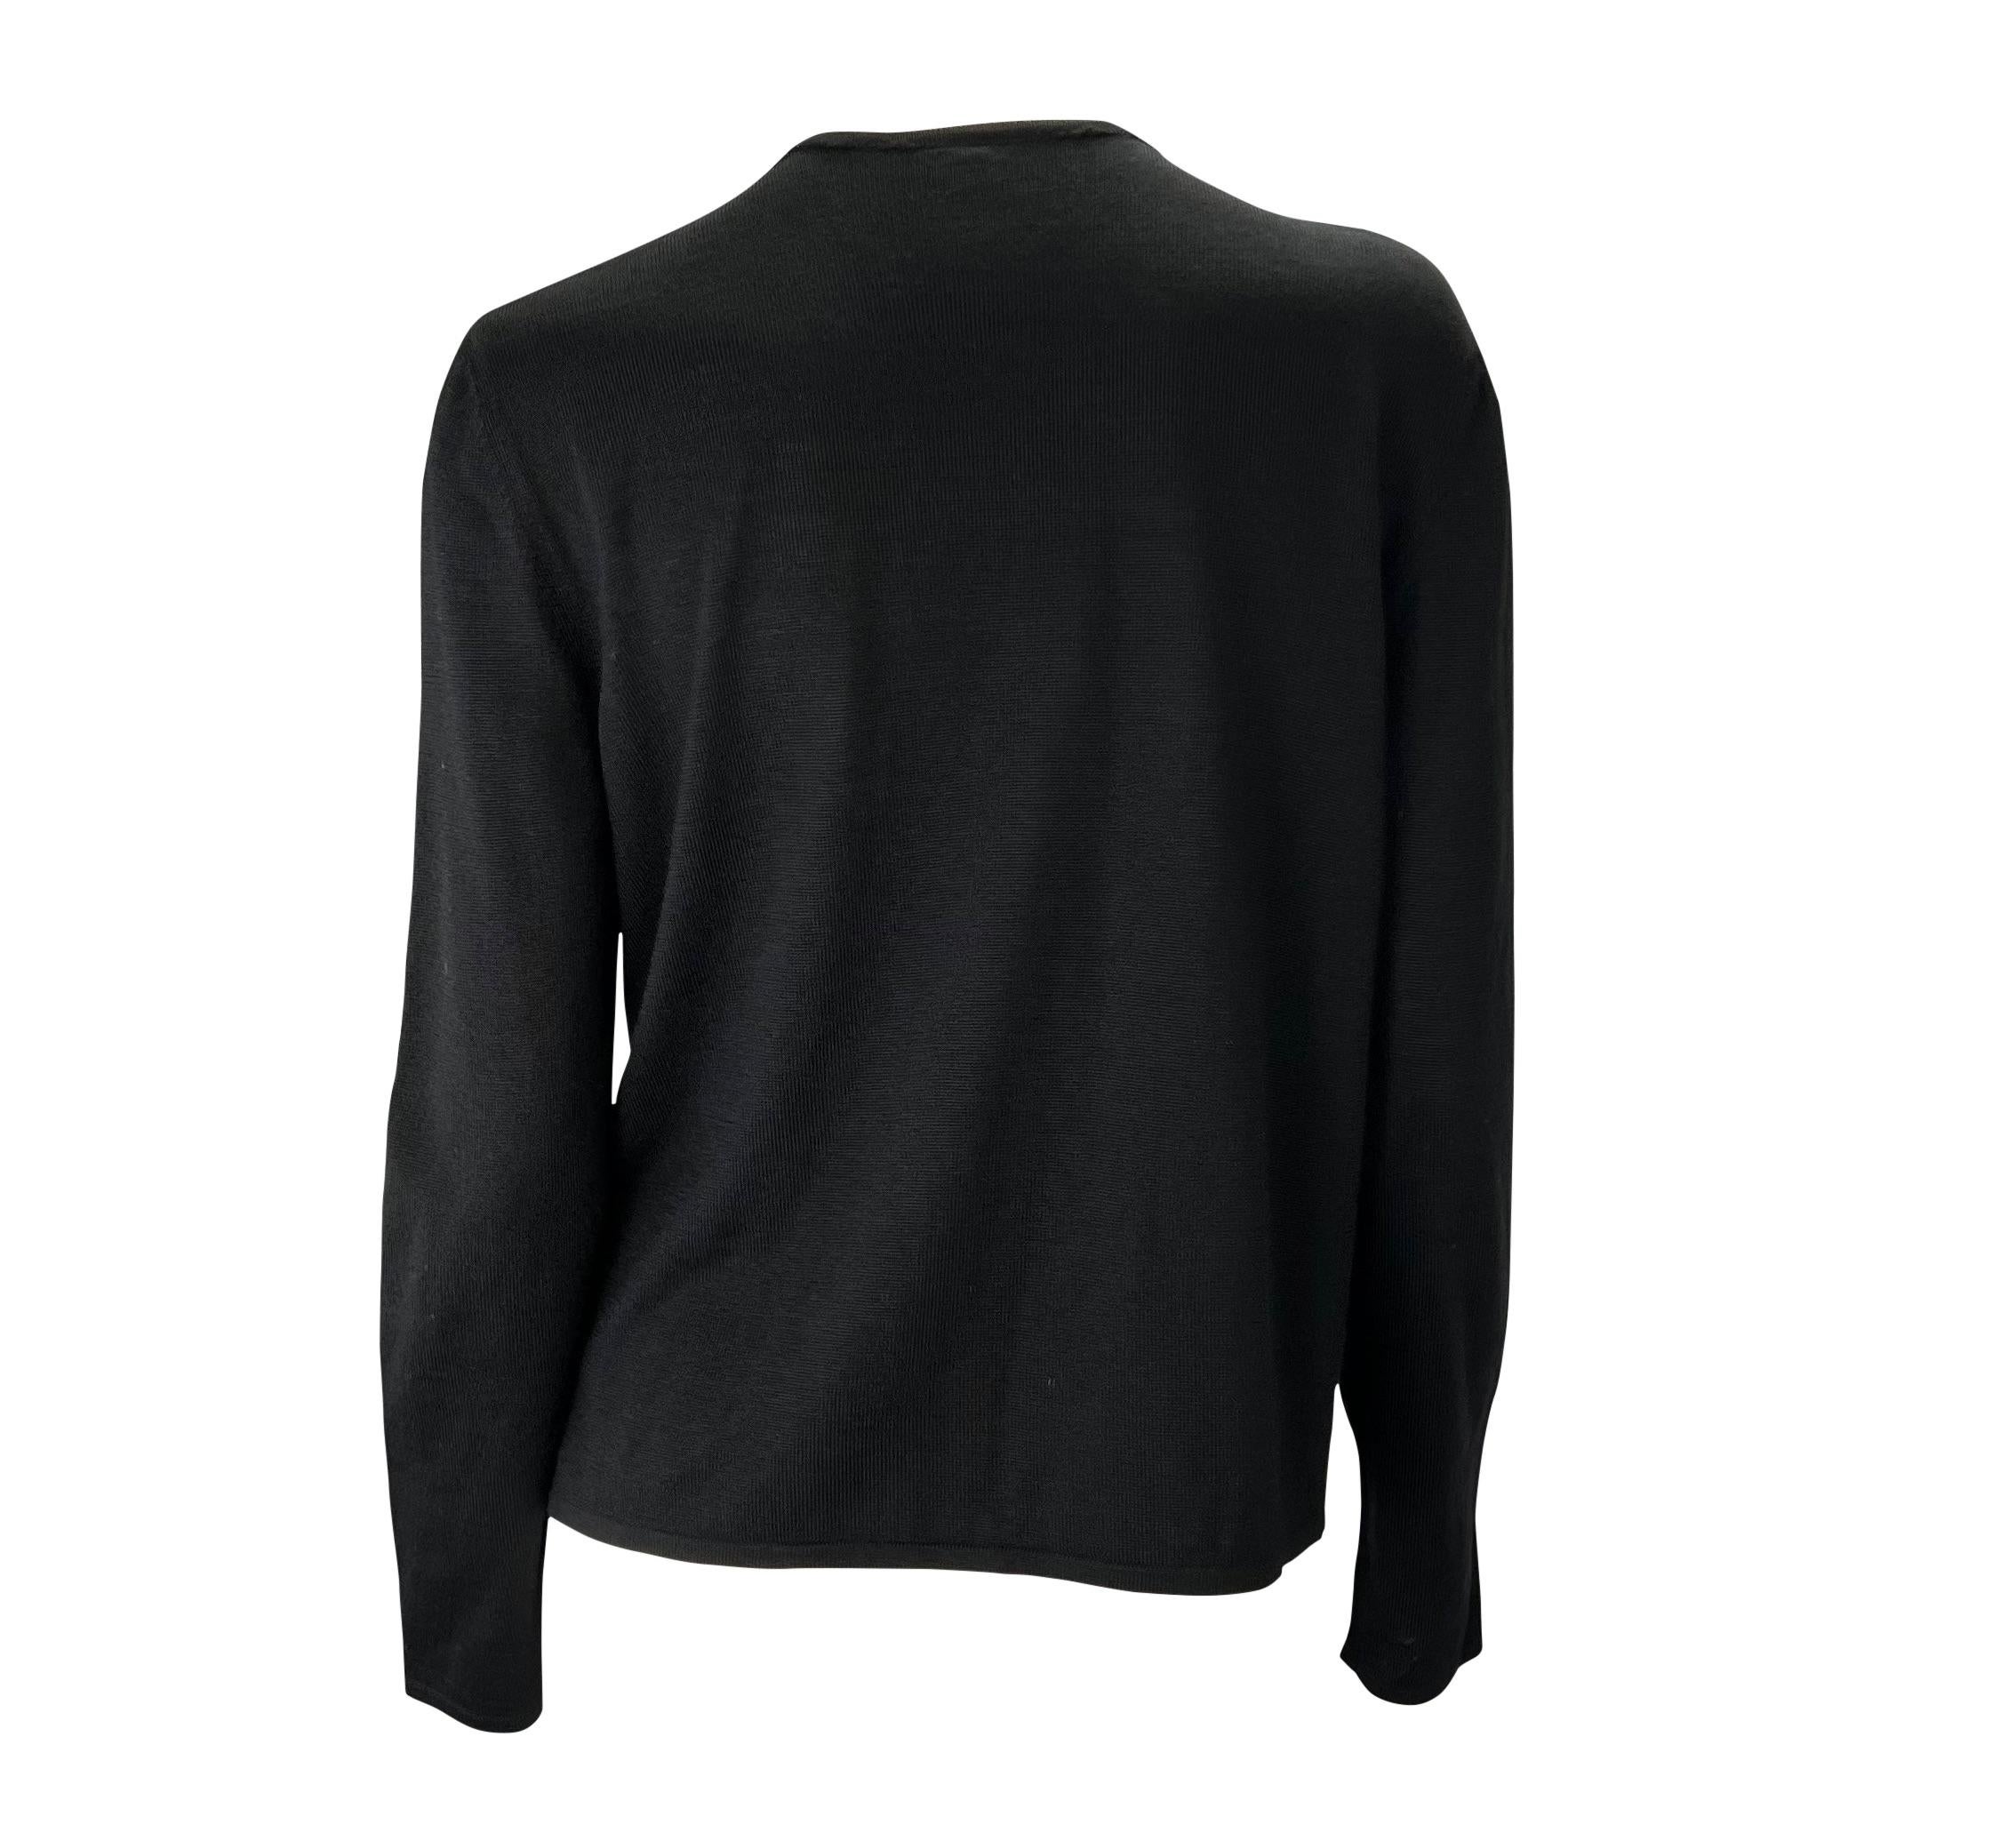 F/W 1998 Gucci by Tom Ford Double Buckle Black Knit Wool Cardigan Top ...